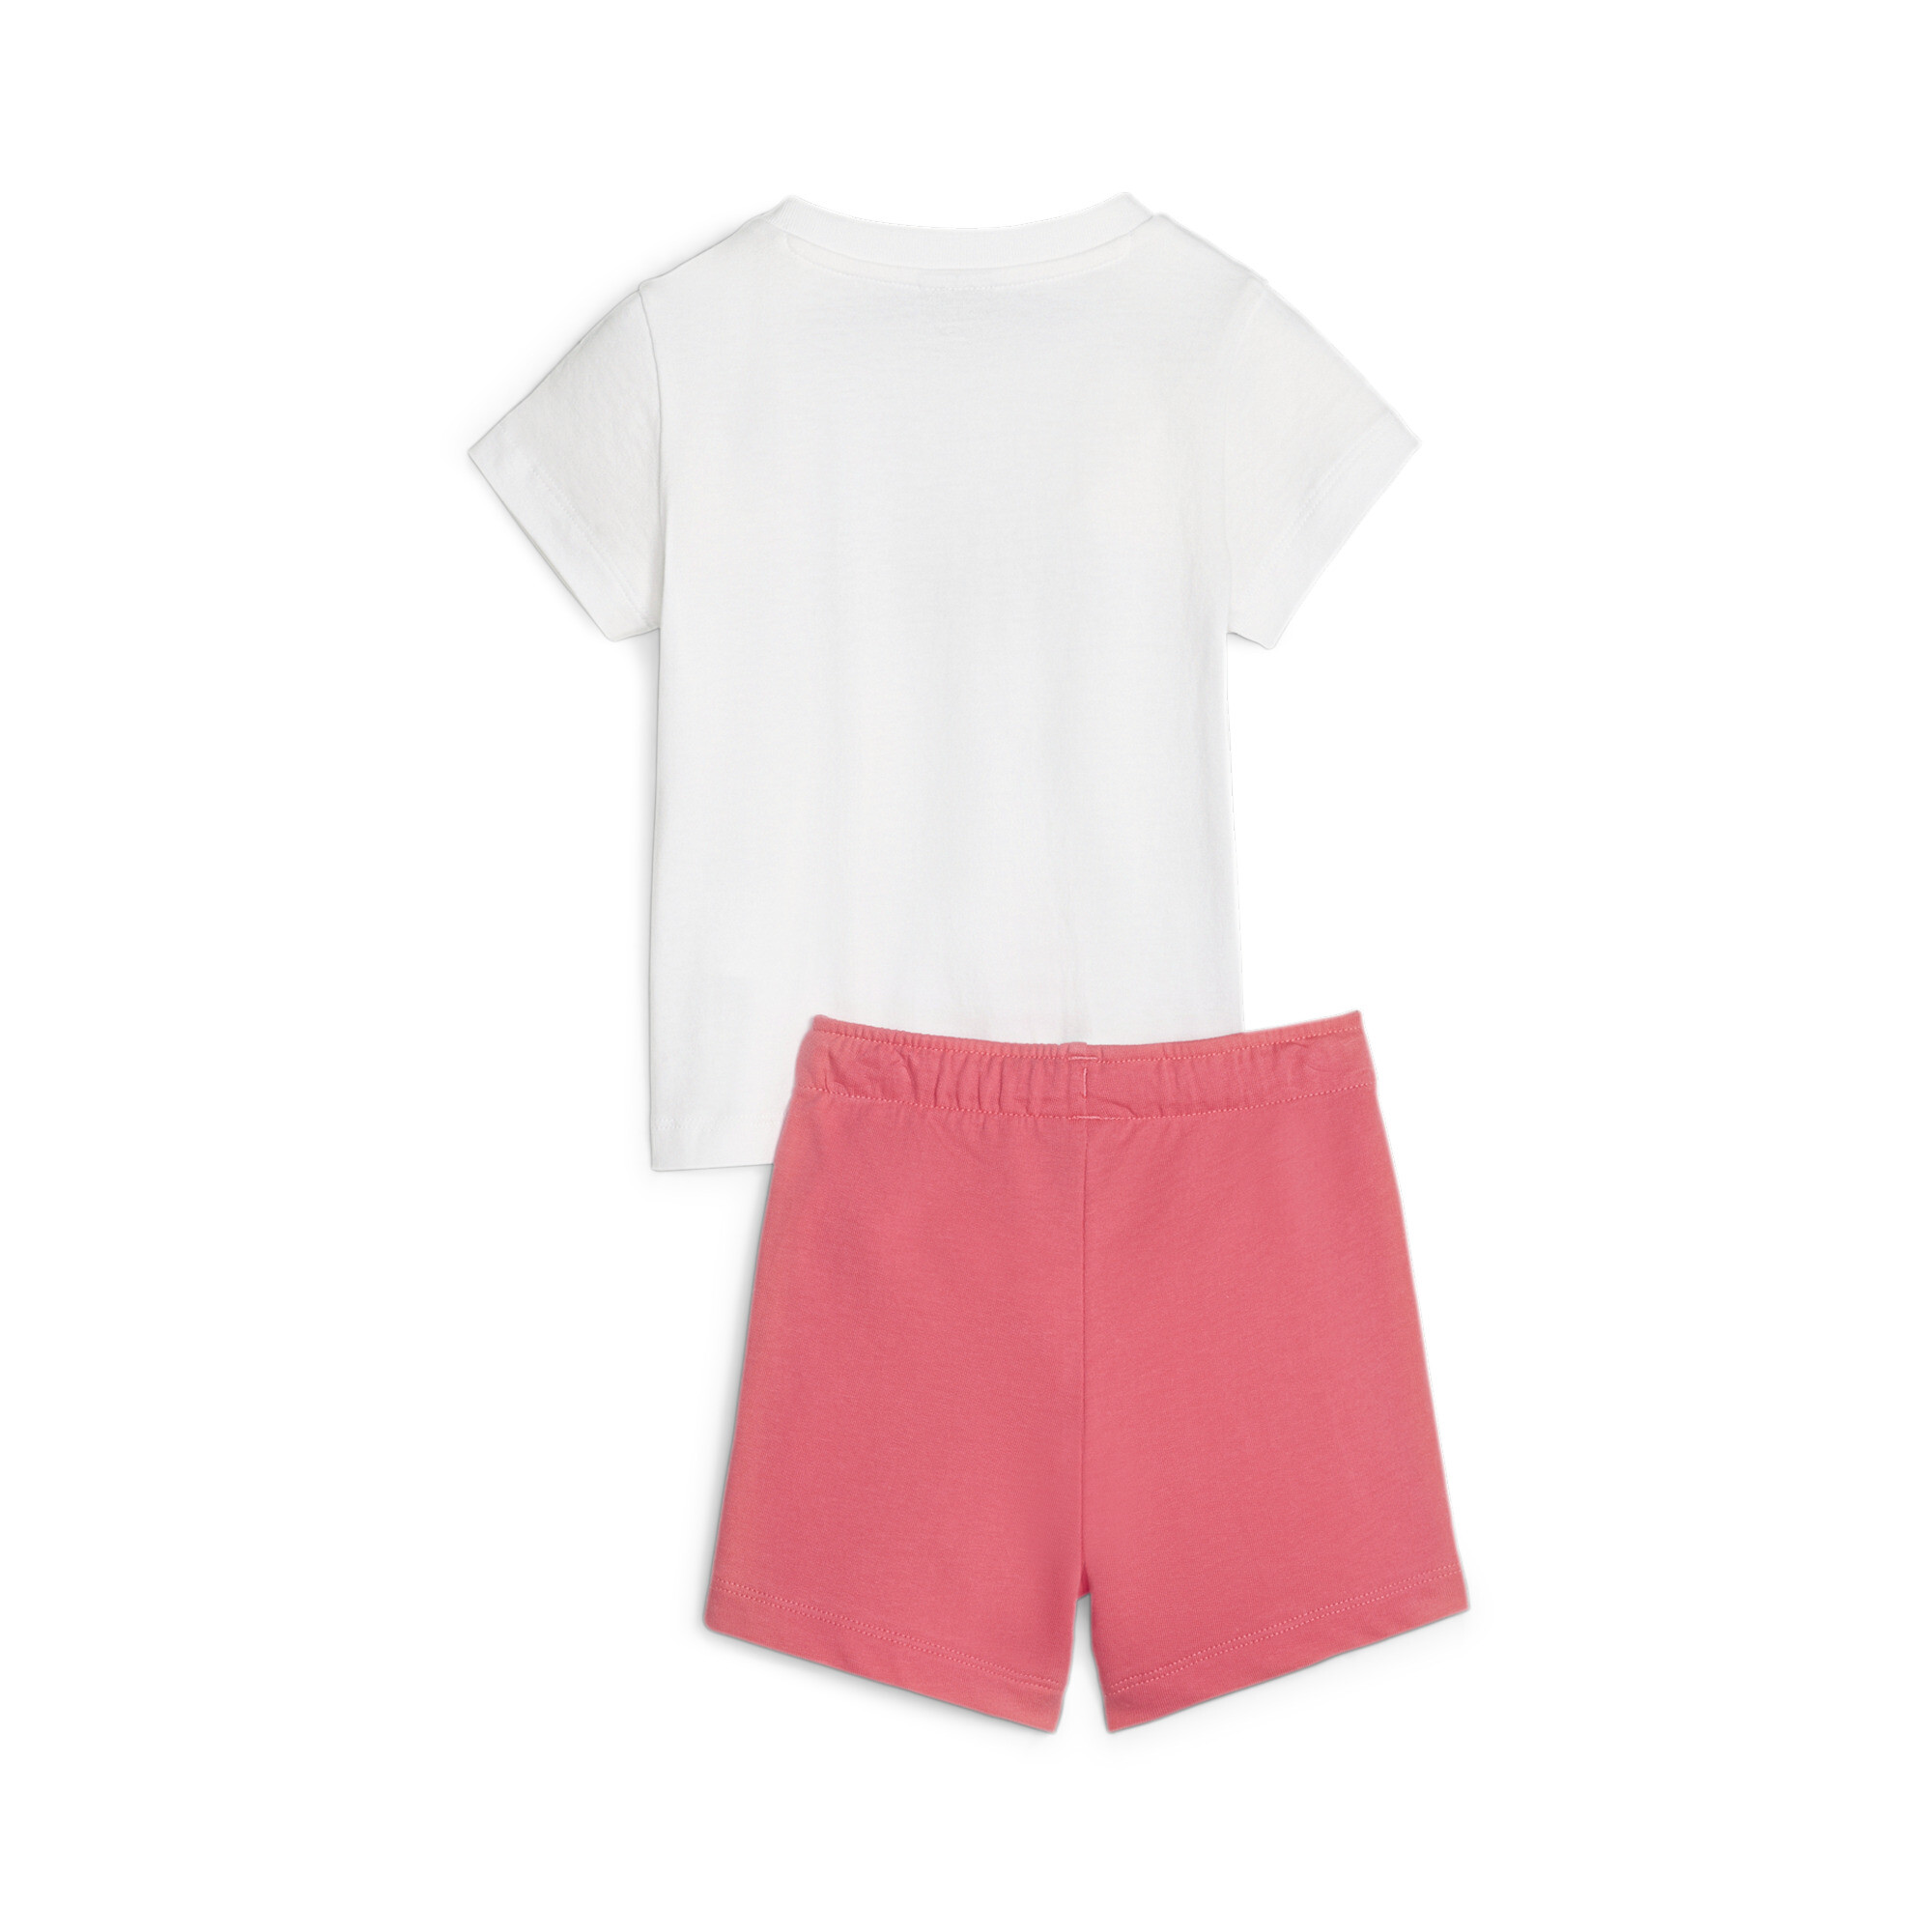 PUMA Minicats T-Shirt And Shorts Babies' Set In Pink, Size 2-4 Months